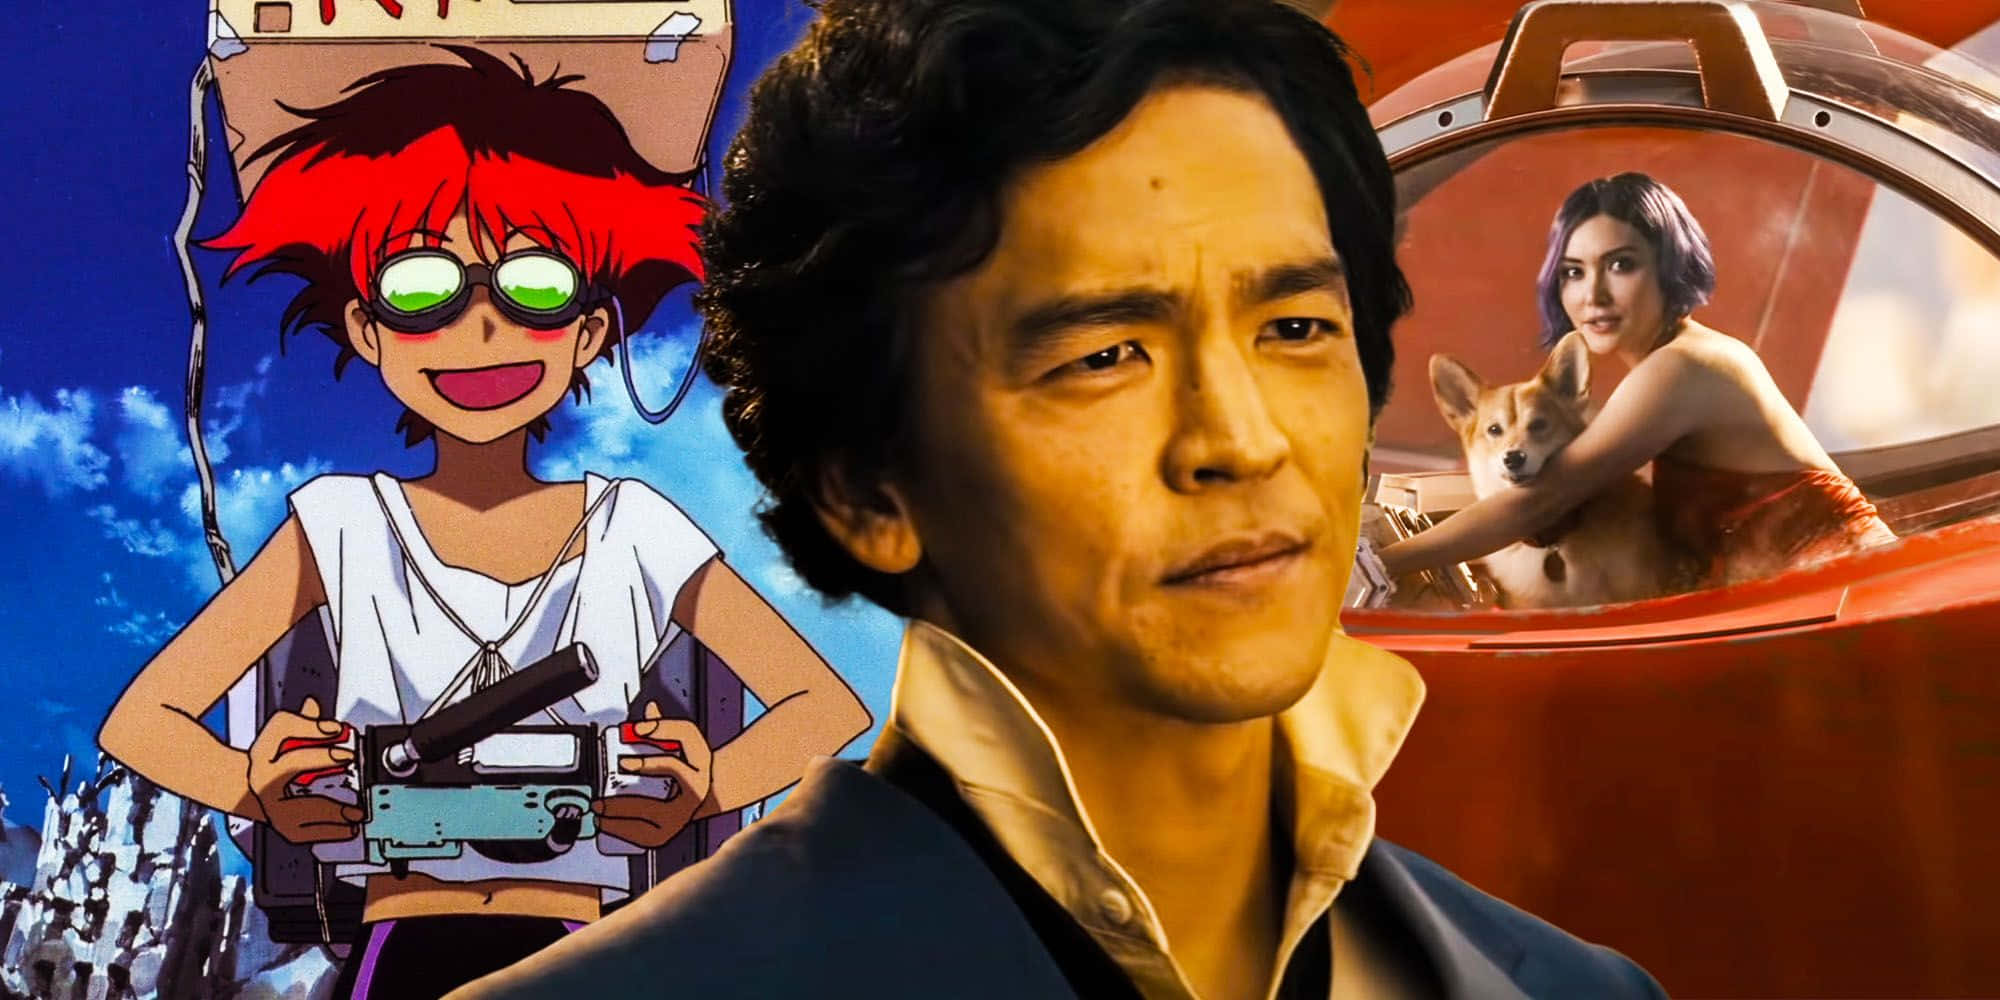 Edward, the genius hacker from Cowboy Bebop, posing with a smile Wallpaper